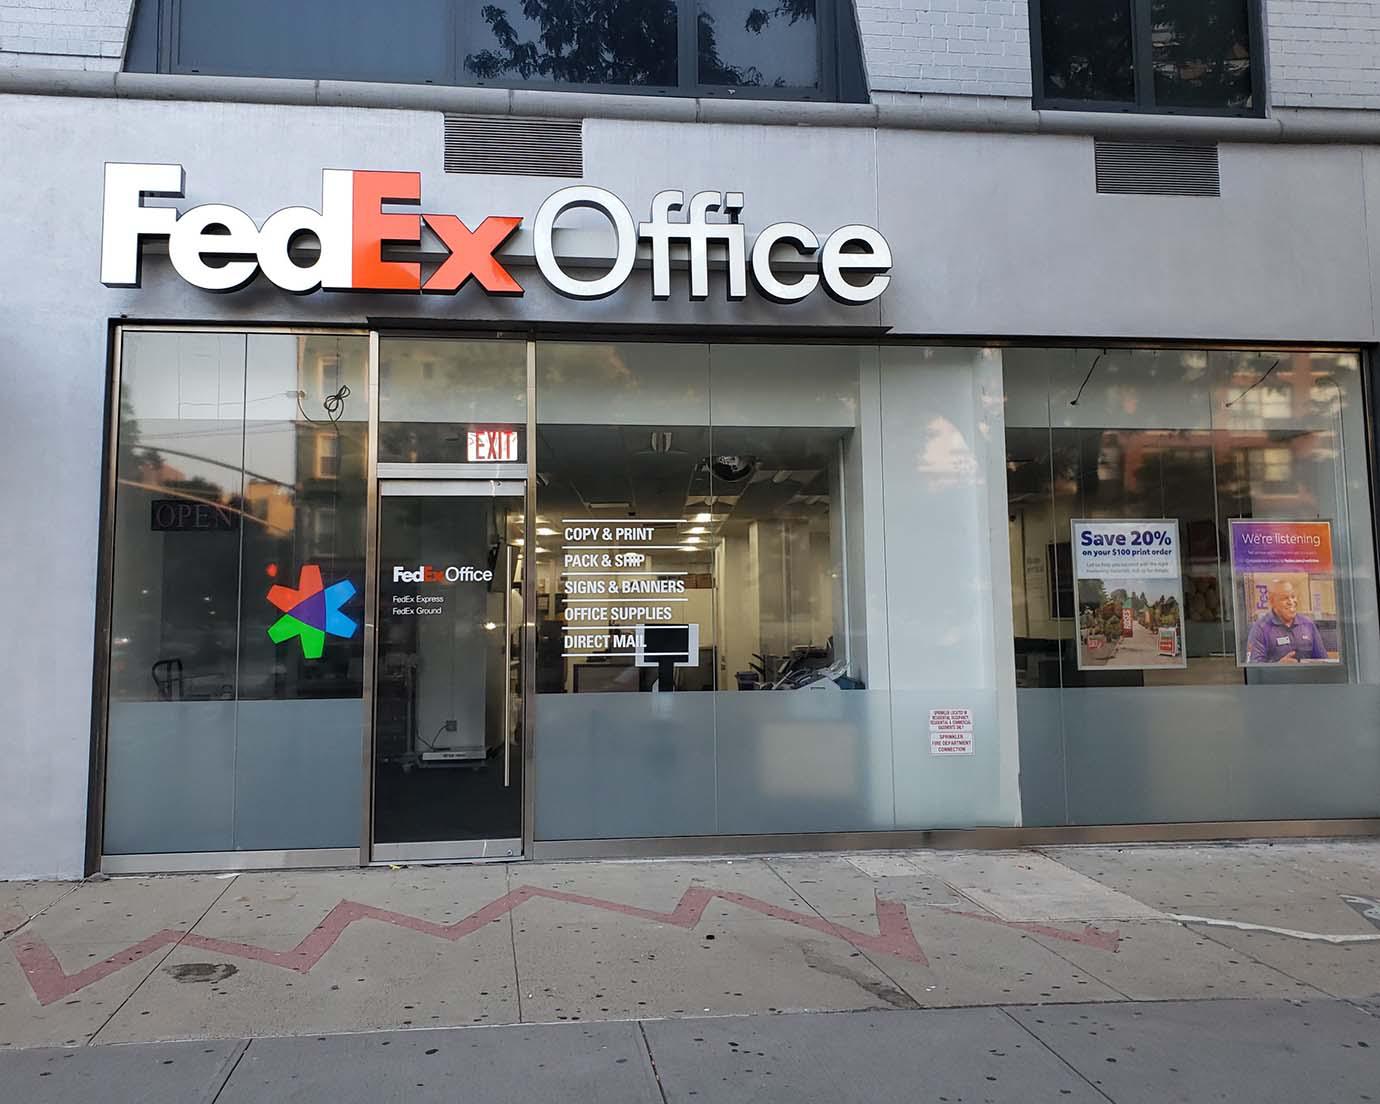 Exterior photo of FedEx Office location at 250 E Houston St\t Print quickly and easily in the self-service area at the FedEx Office location 250 E Houston St from email, USB, or the cloud\t FedEx Office Print & Go near 250 E Houston St\t Shipping boxes and packing services available at FedEx Office 250 E Houston St\t Get banners, signs, posters and prints at FedEx Office 250 E Houston St\t Full service printing and packing at FedEx Office 250 E Houston St\t Drop off FedEx packages near 250 E Houston St\t FedEx shipping near 250 E Houston St